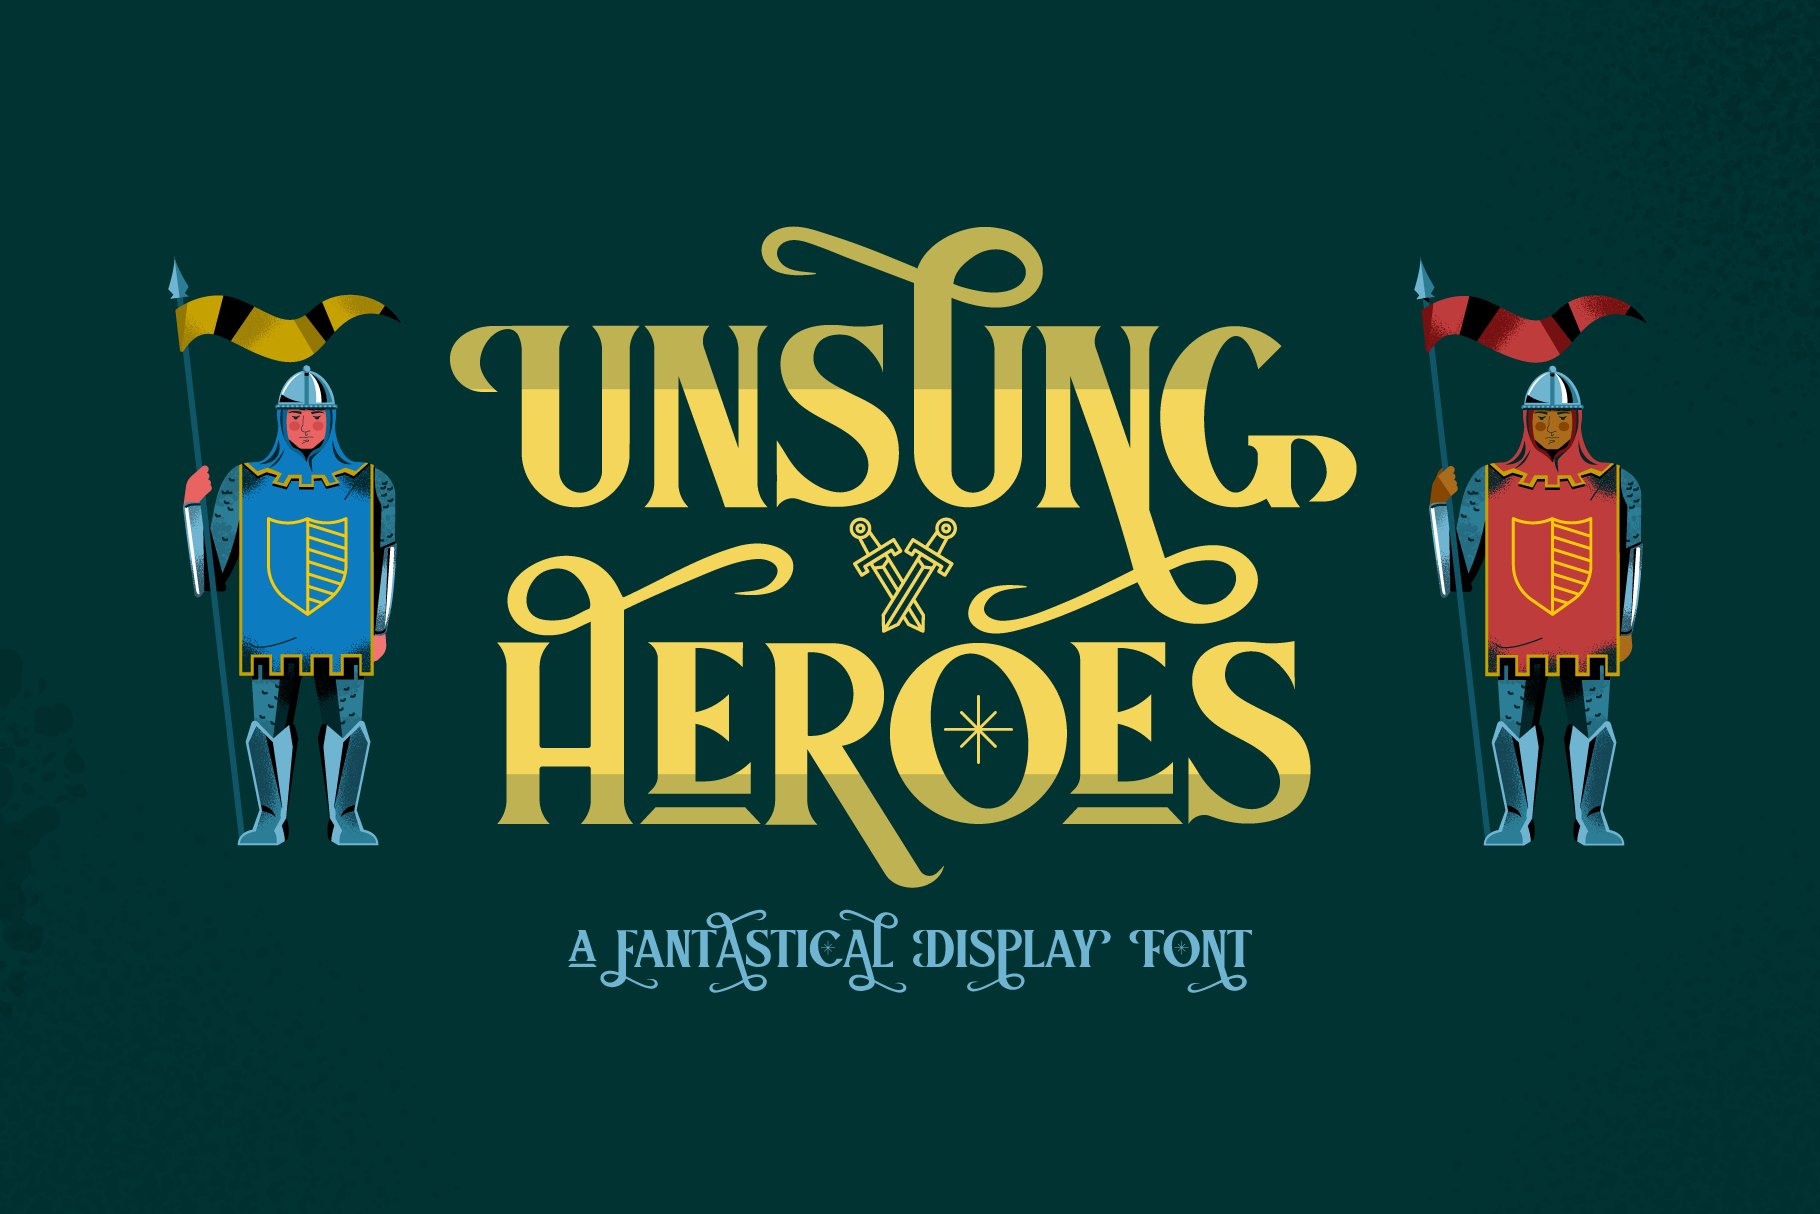 Unsung Heroes Display Font cover image.